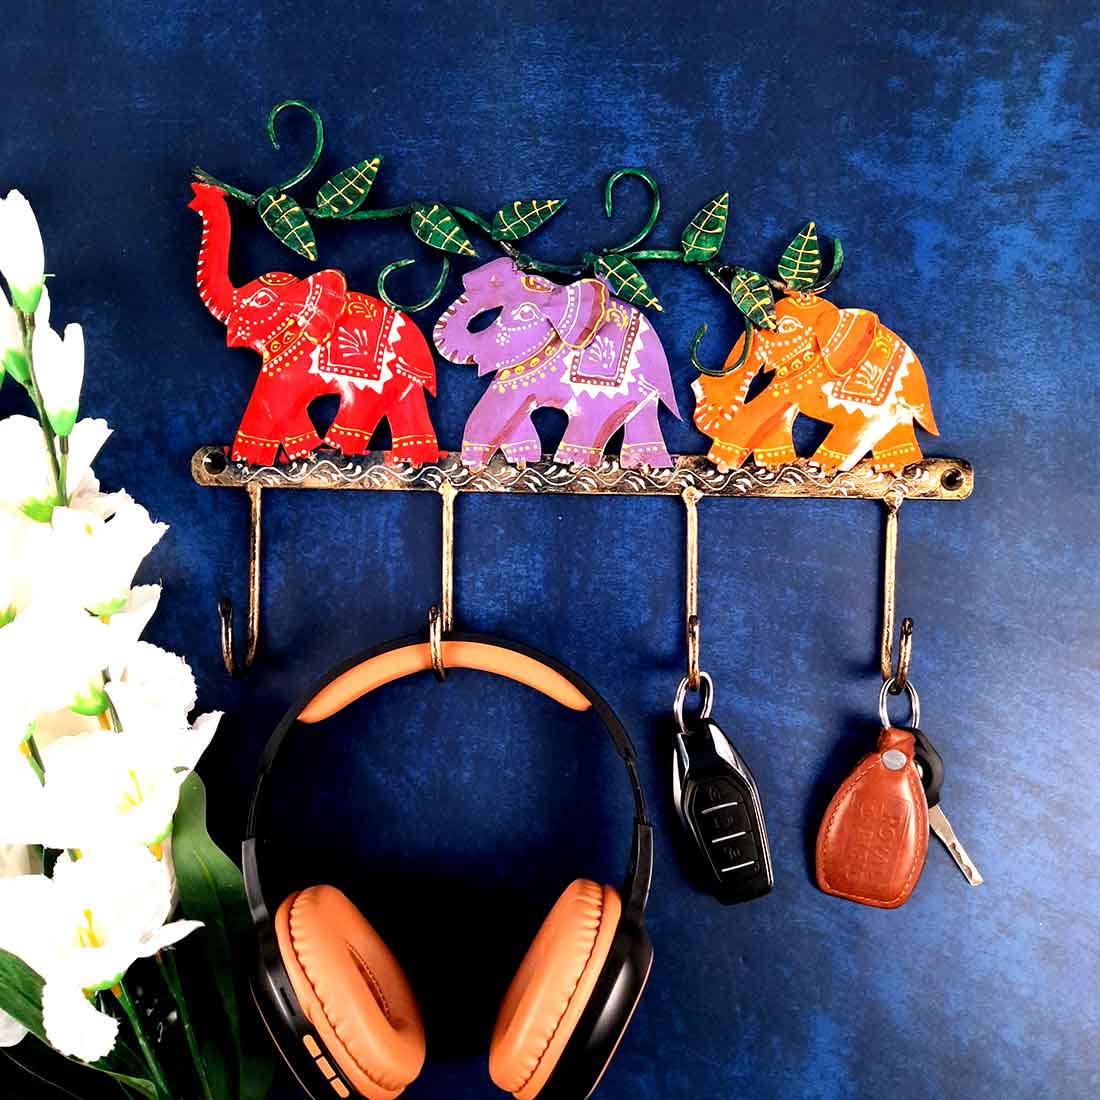 Key Holder Wall Hanger | Key Hanging Organizer Stand - Elephant Design| Key Hook Hanging Wall Mount - For Home, Entrance, Office Decor & Gifts - 11 inch (4 Hooks)